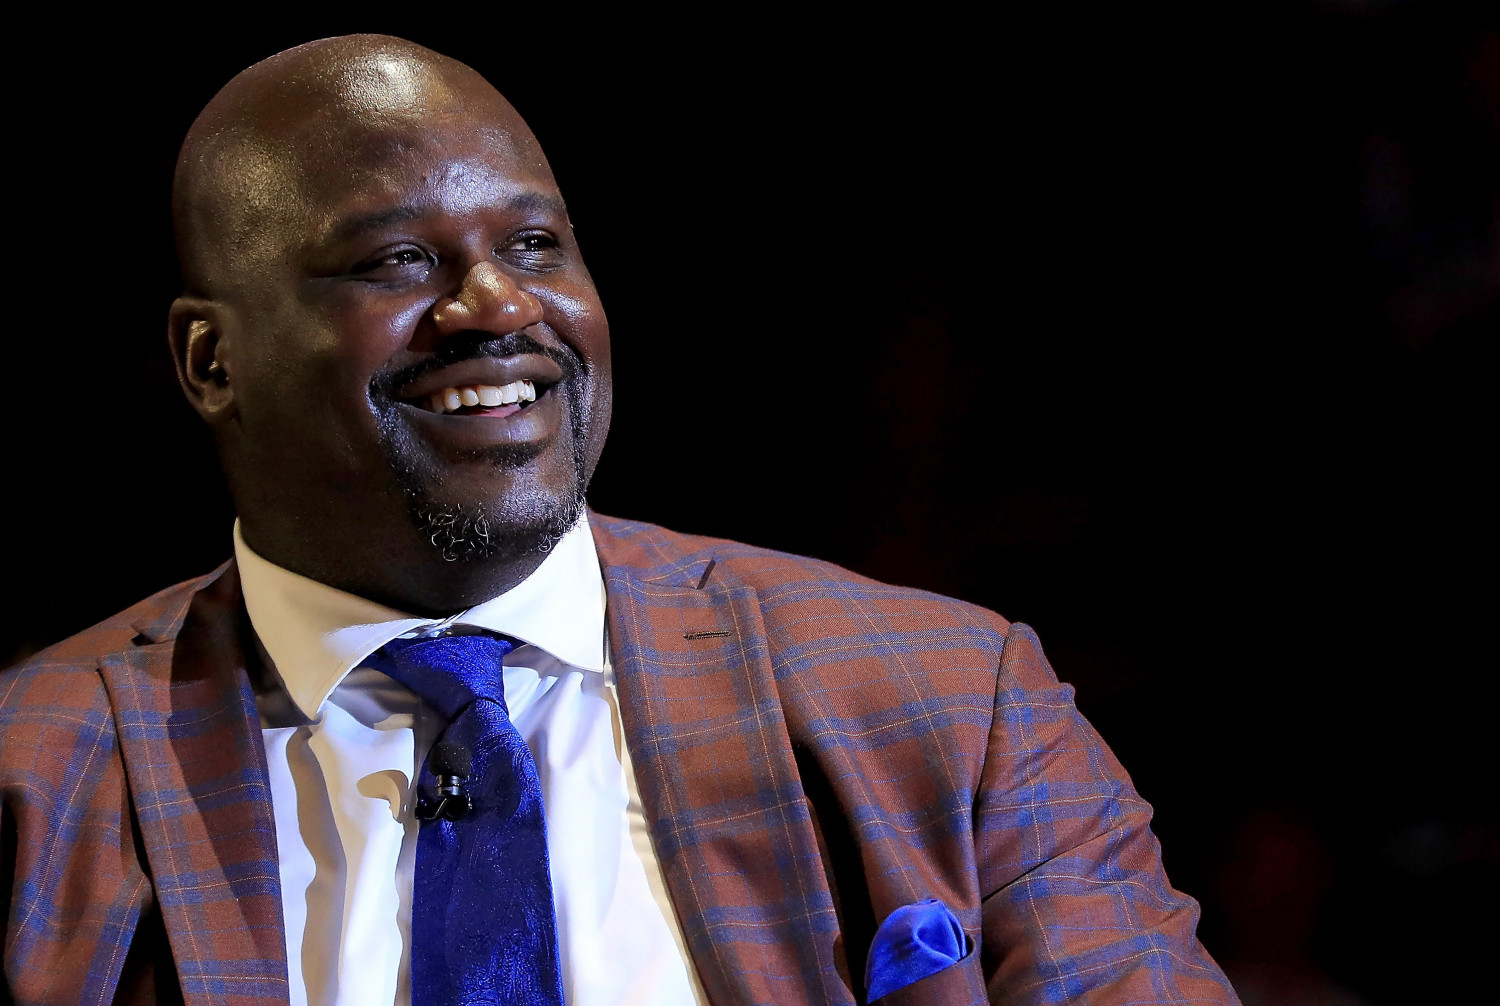 Shaquille O’Neal Helps Pay a Year’s Rent for Boy Paralyzed From Gunshot Wound